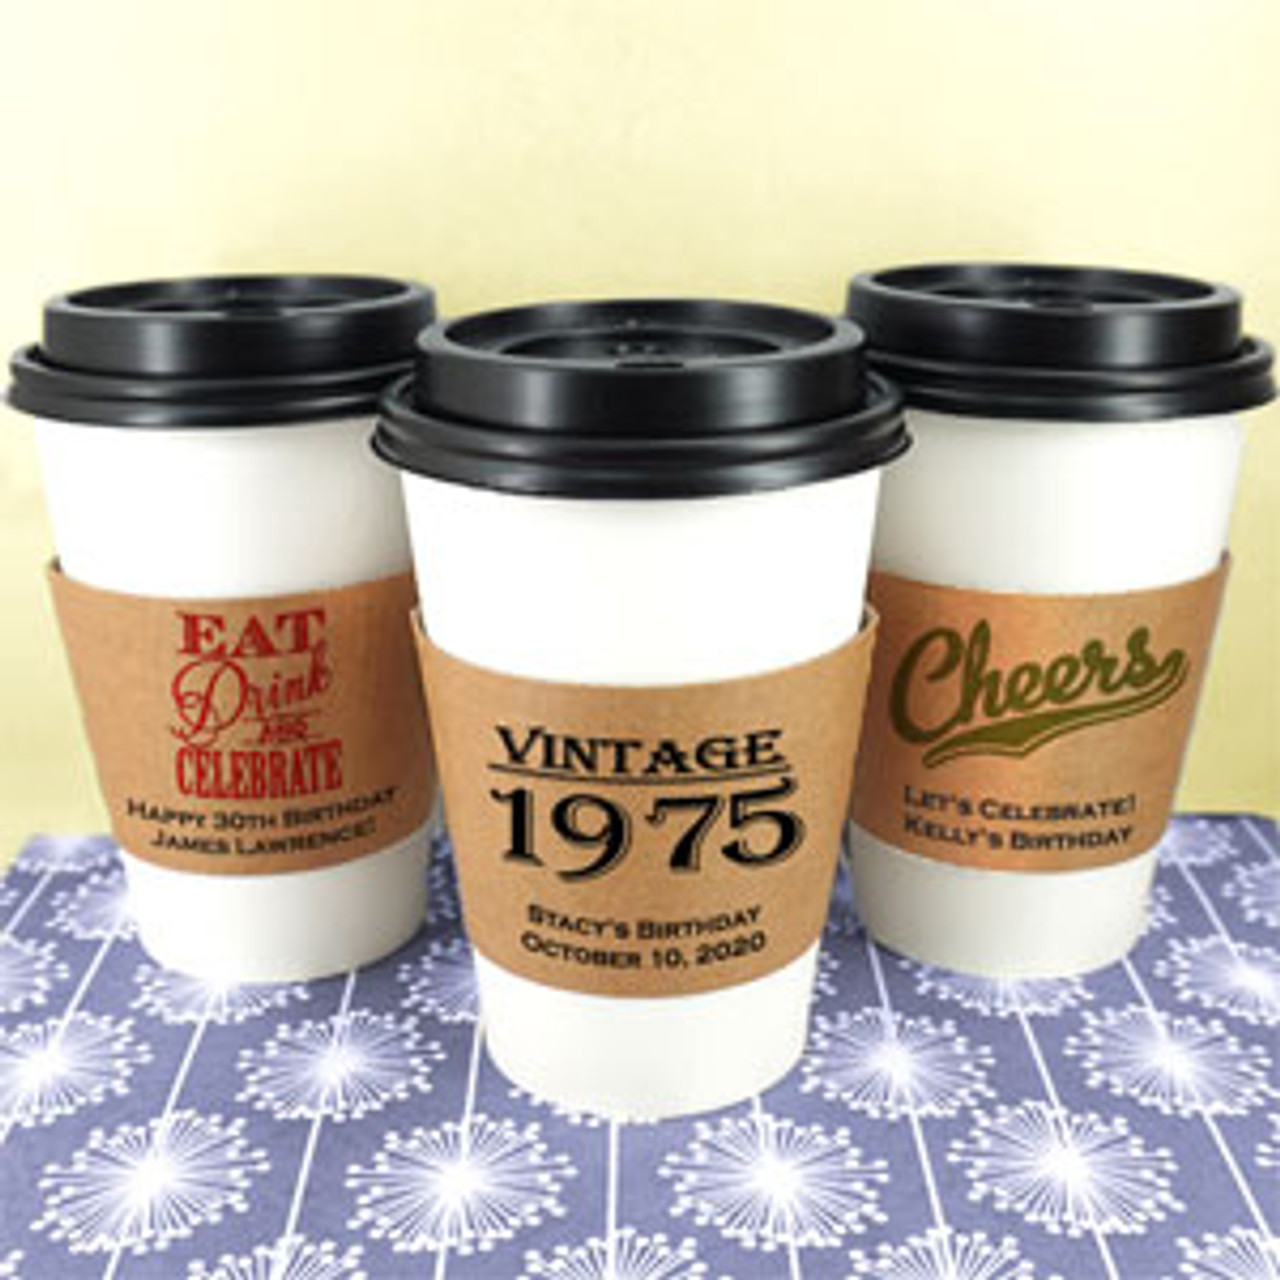 Personalized Coffee Sleeves